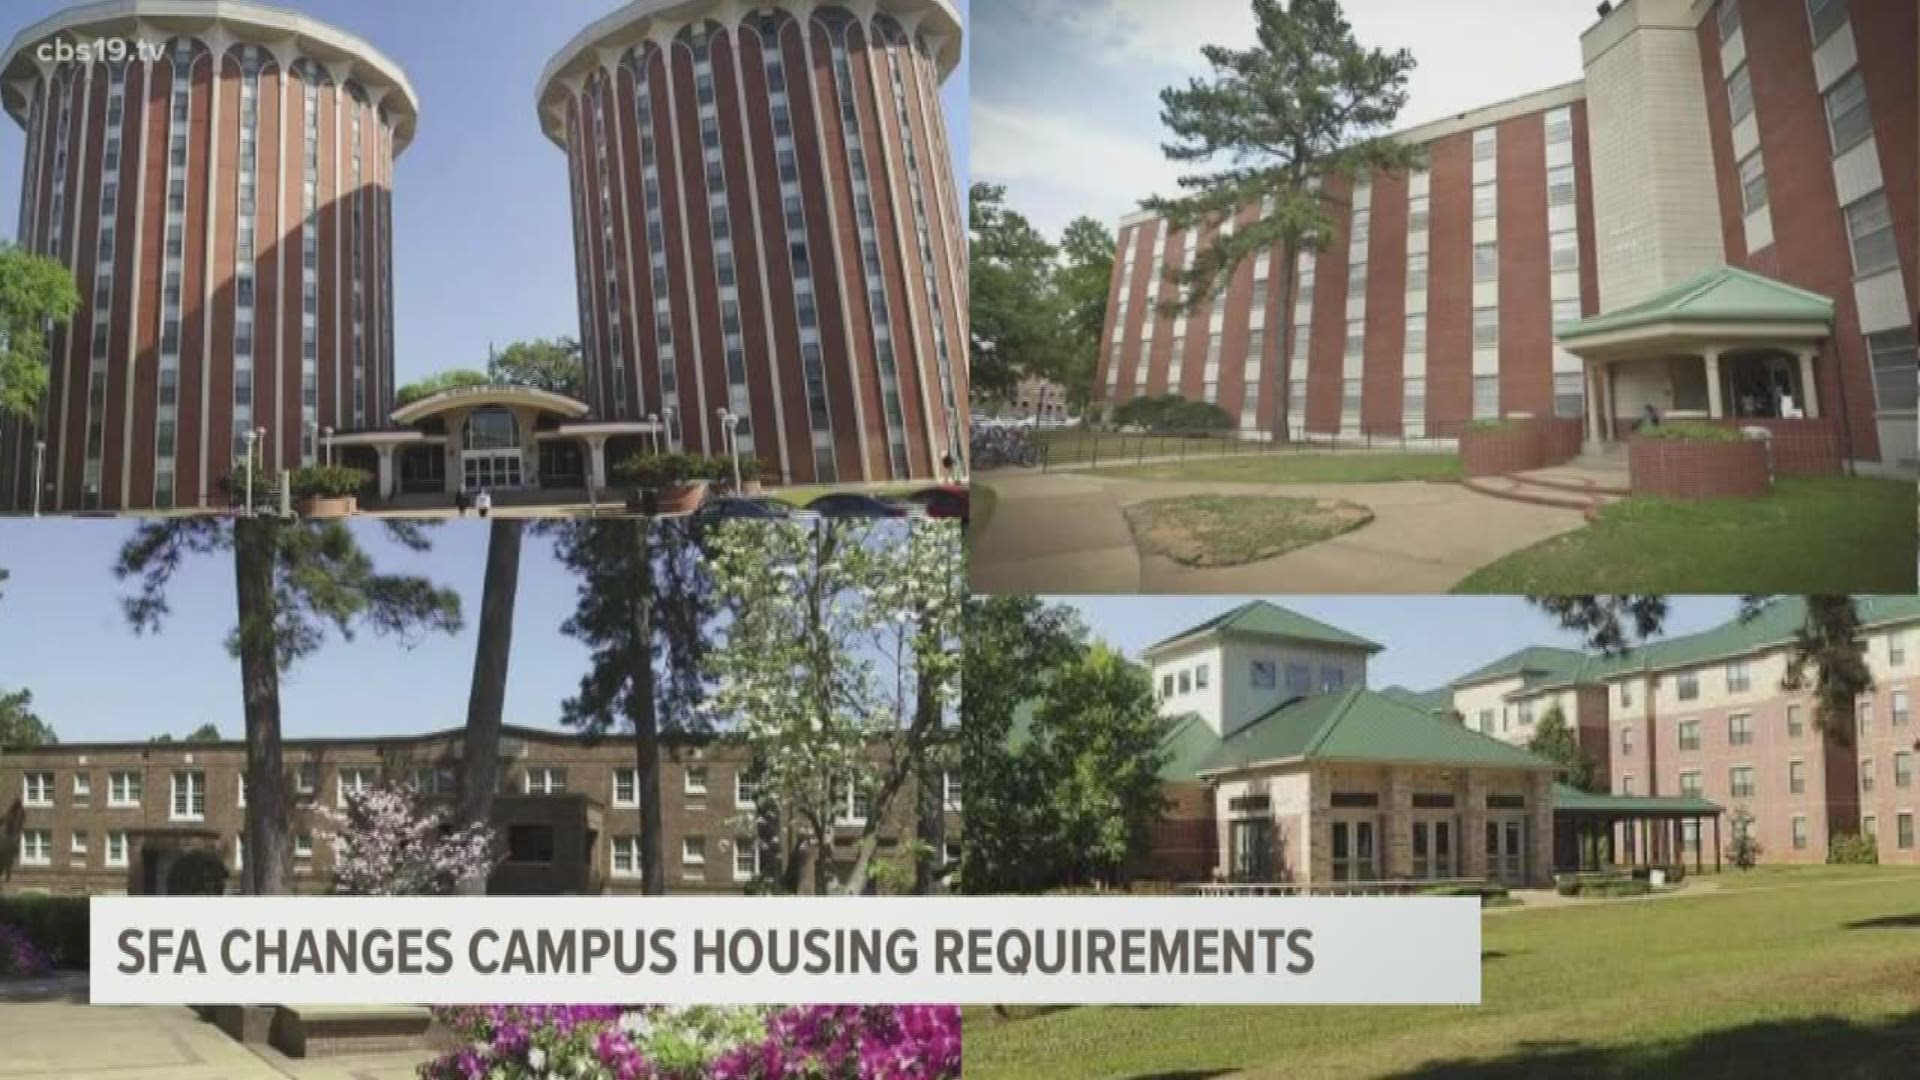 The university announced freshmen will no longer be required to live on-campus. There will be a number of other changes as well.